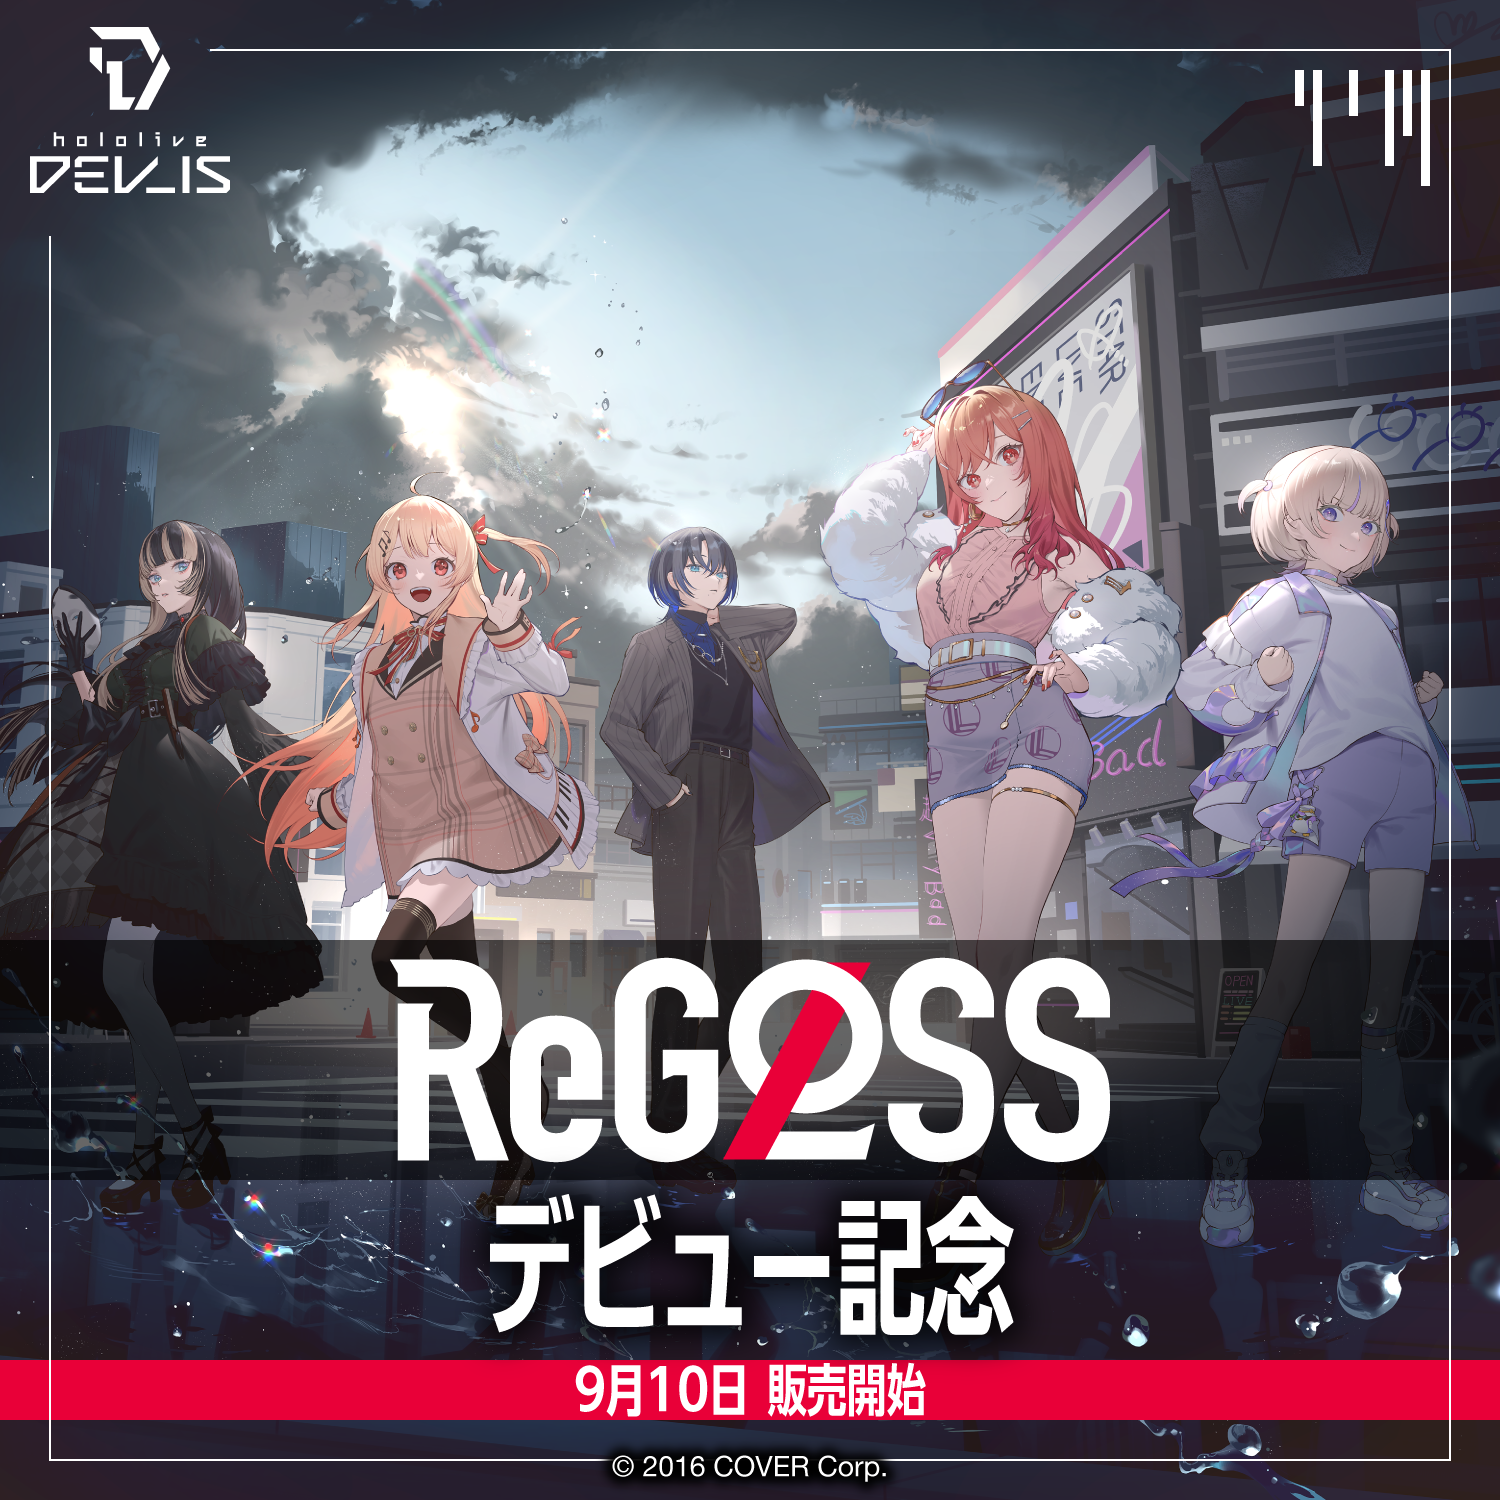 ReGLOSS デビュー記念 – hololive production official shop